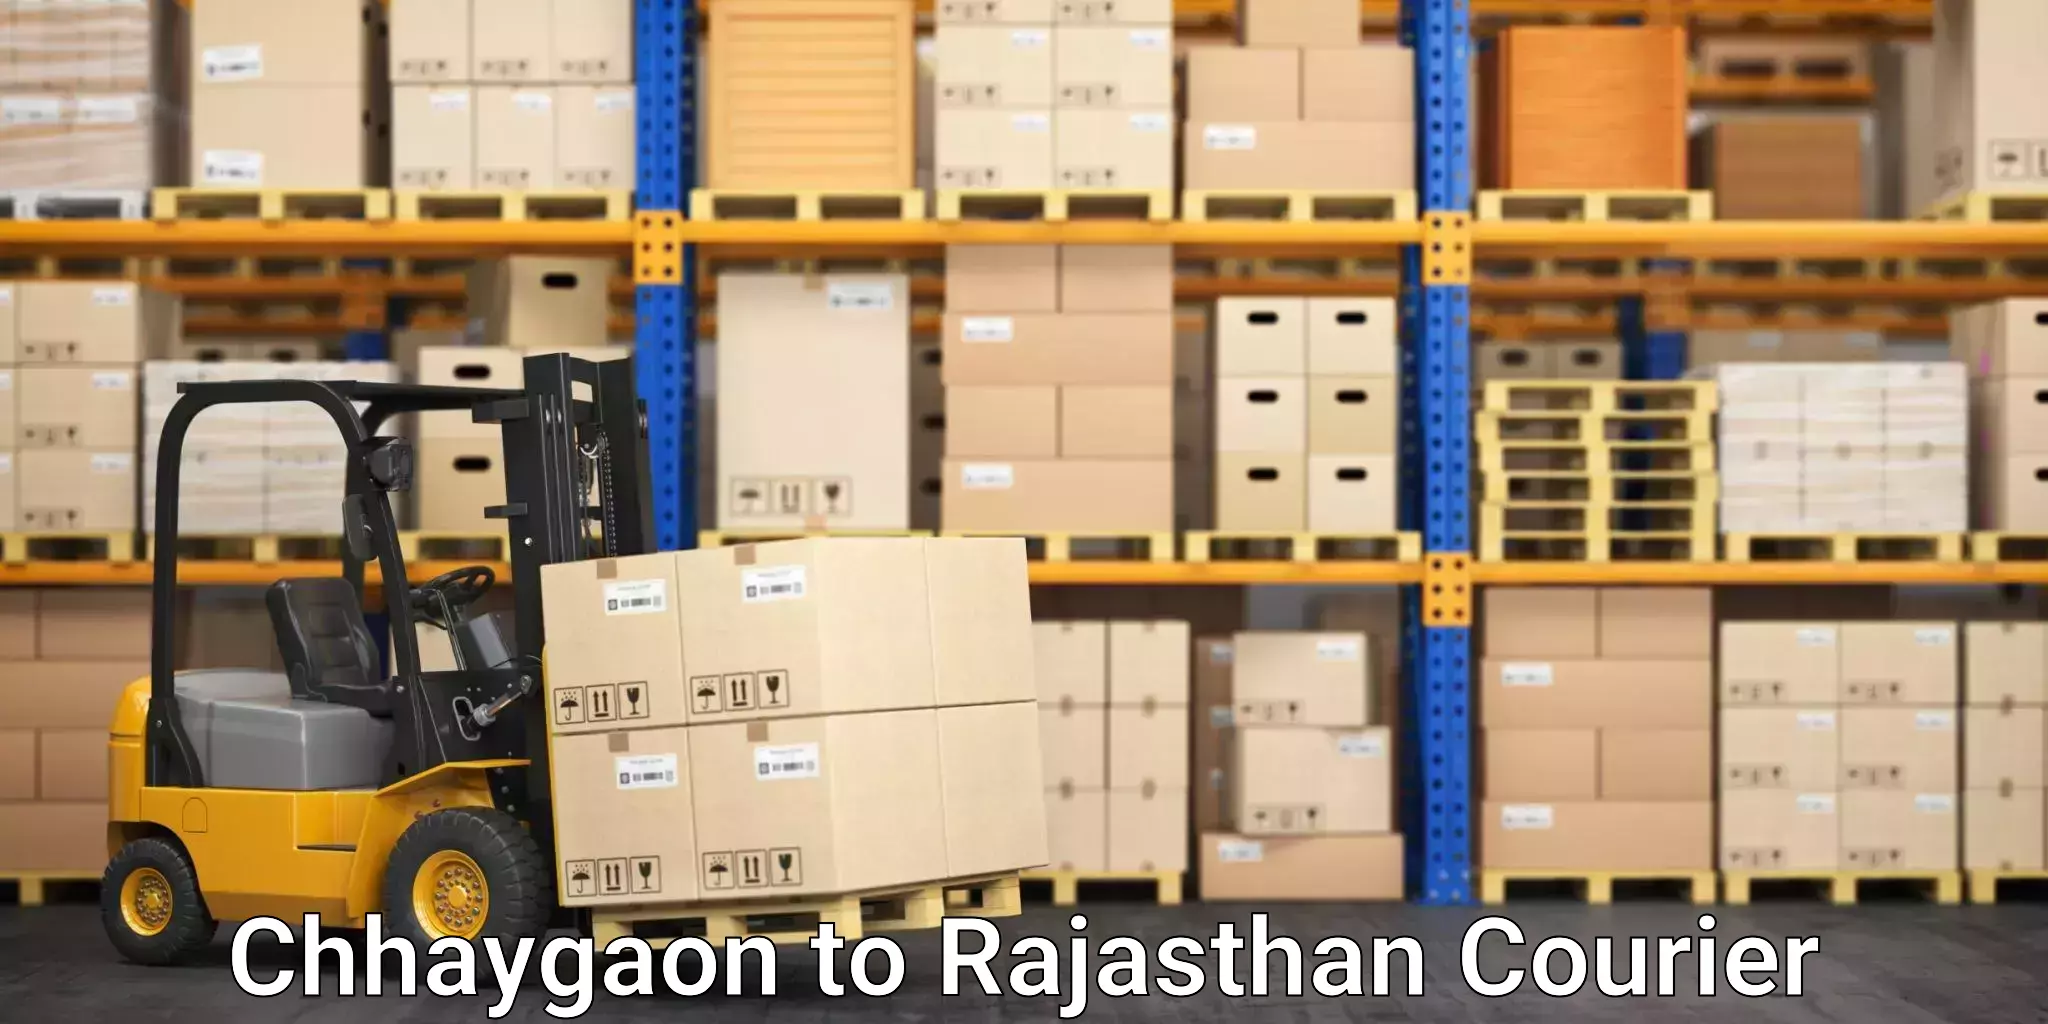 Professional courier handling Chhaygaon to Ras Pali